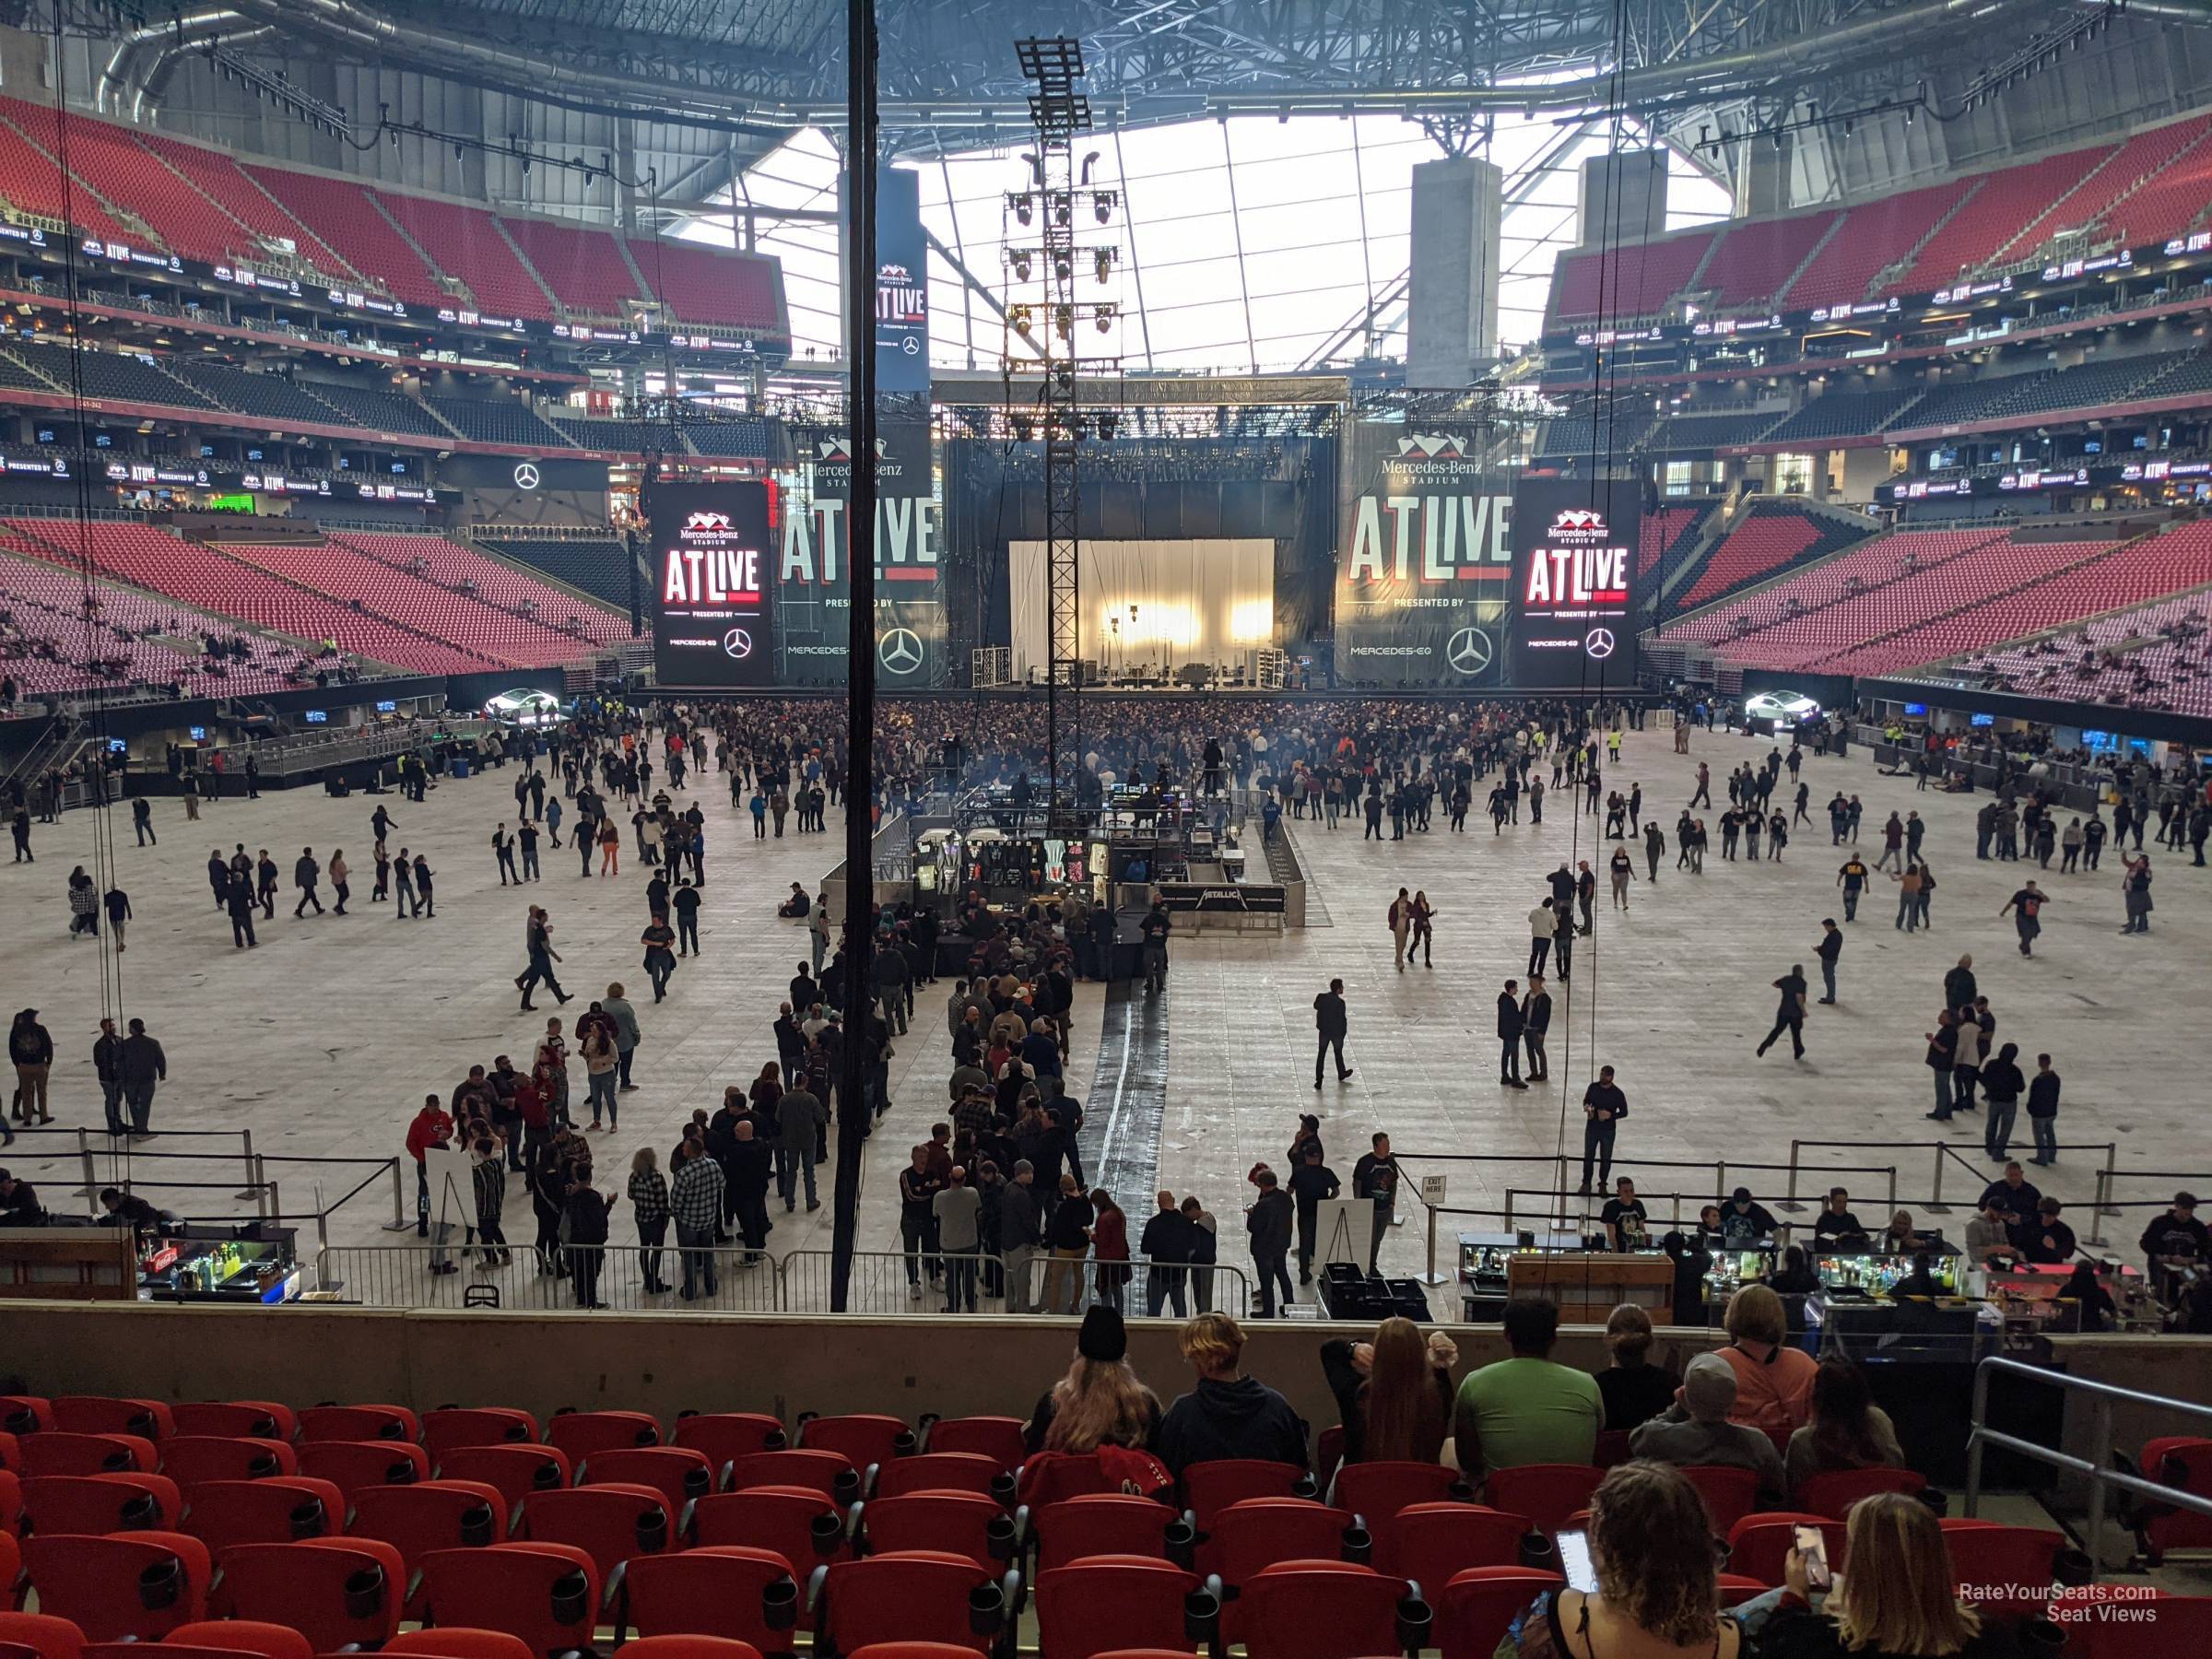 section 119, row 21 seat view  for concert - mercedes-benz stadium